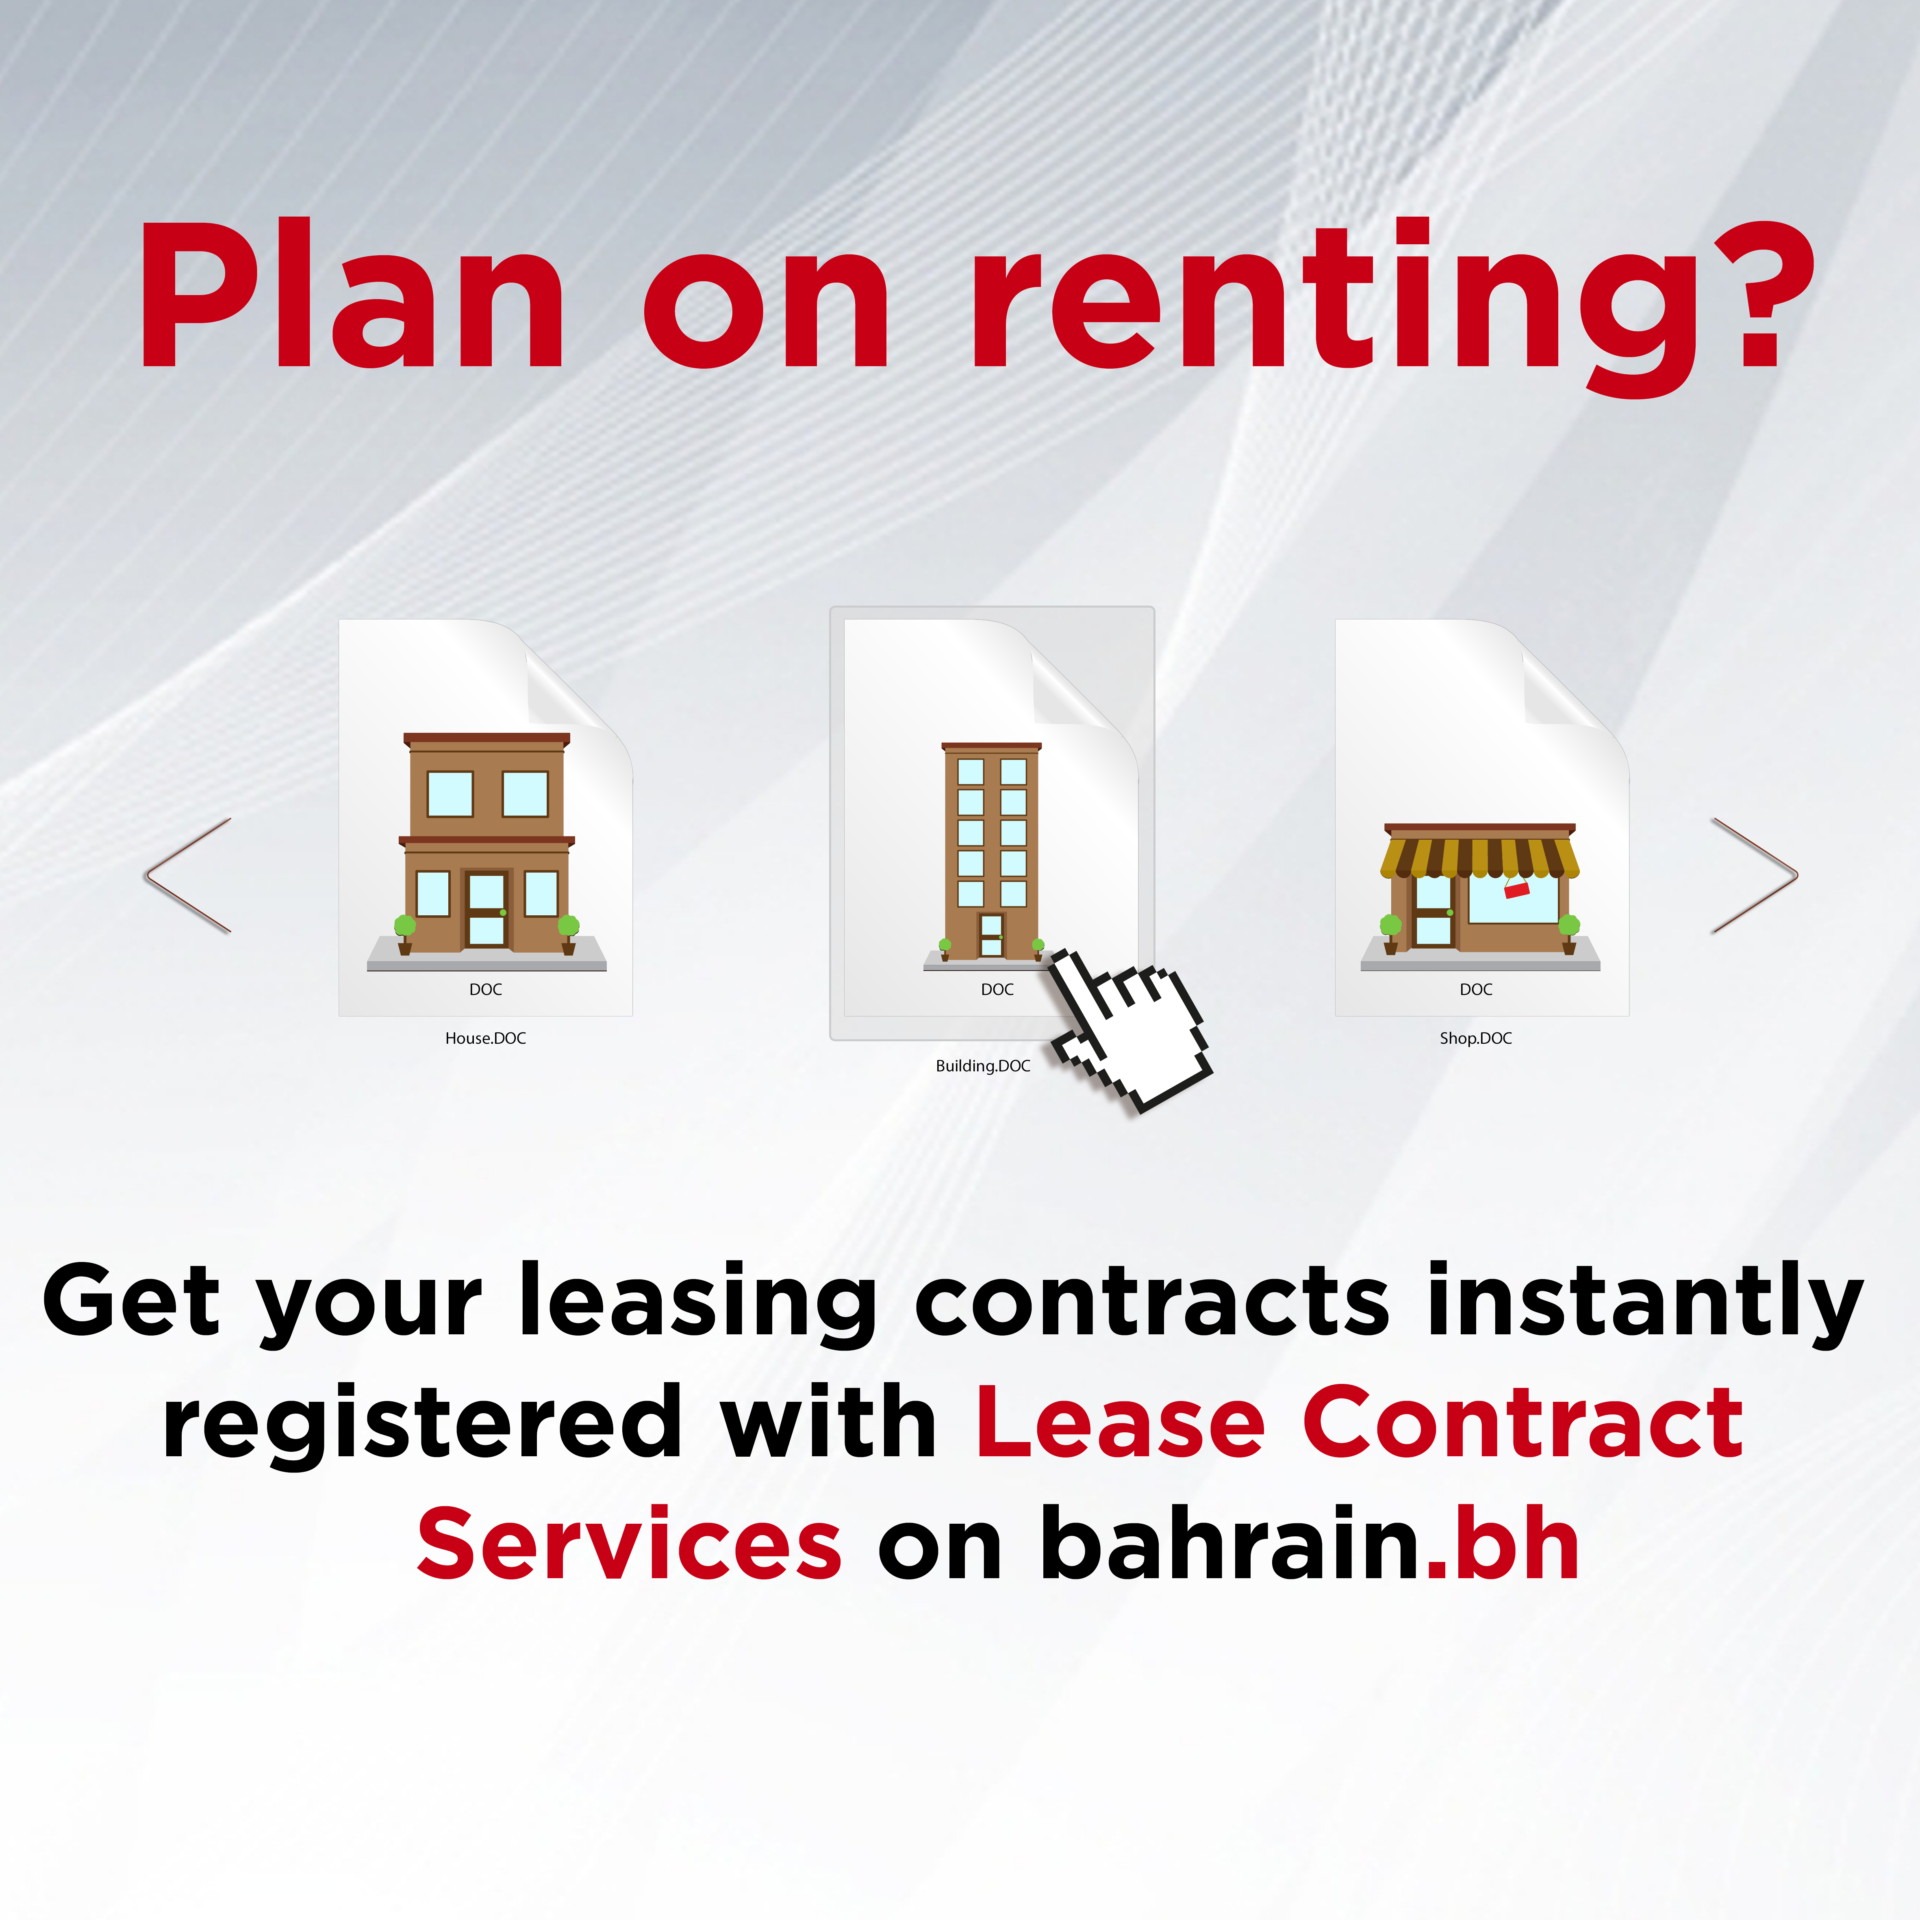 Register Your Lease Contract Quickly and Easily via Bahrain.bh!